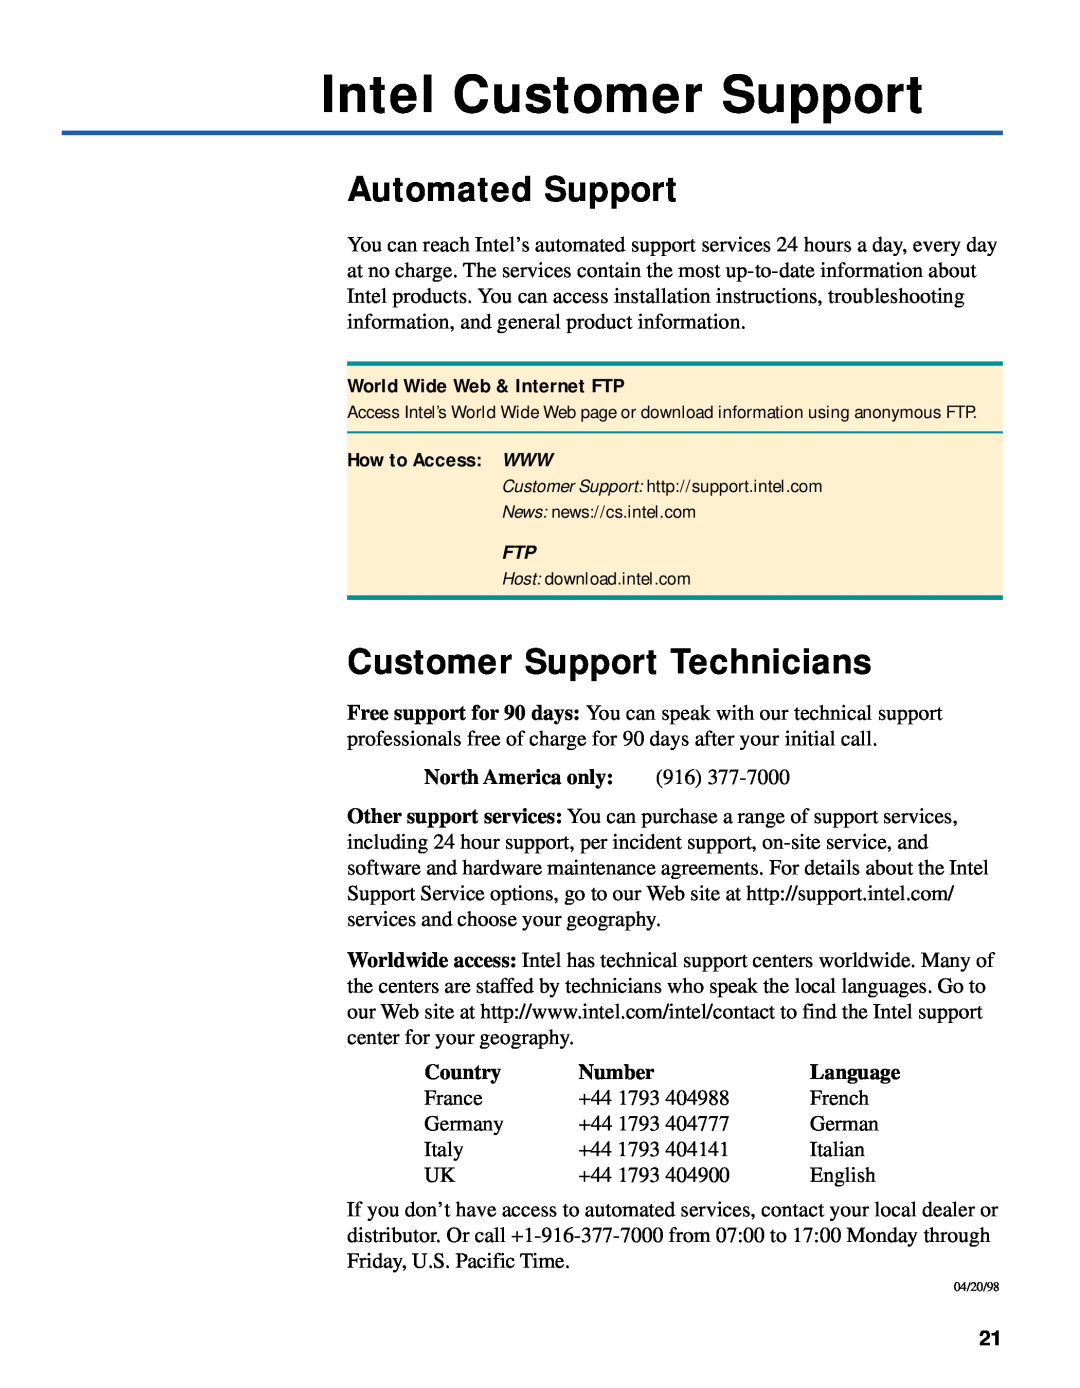 Intel 210T Intel Customer Support, Automated Support, Customer Support Technicians, World Wide Web & Internet FTP, Country 